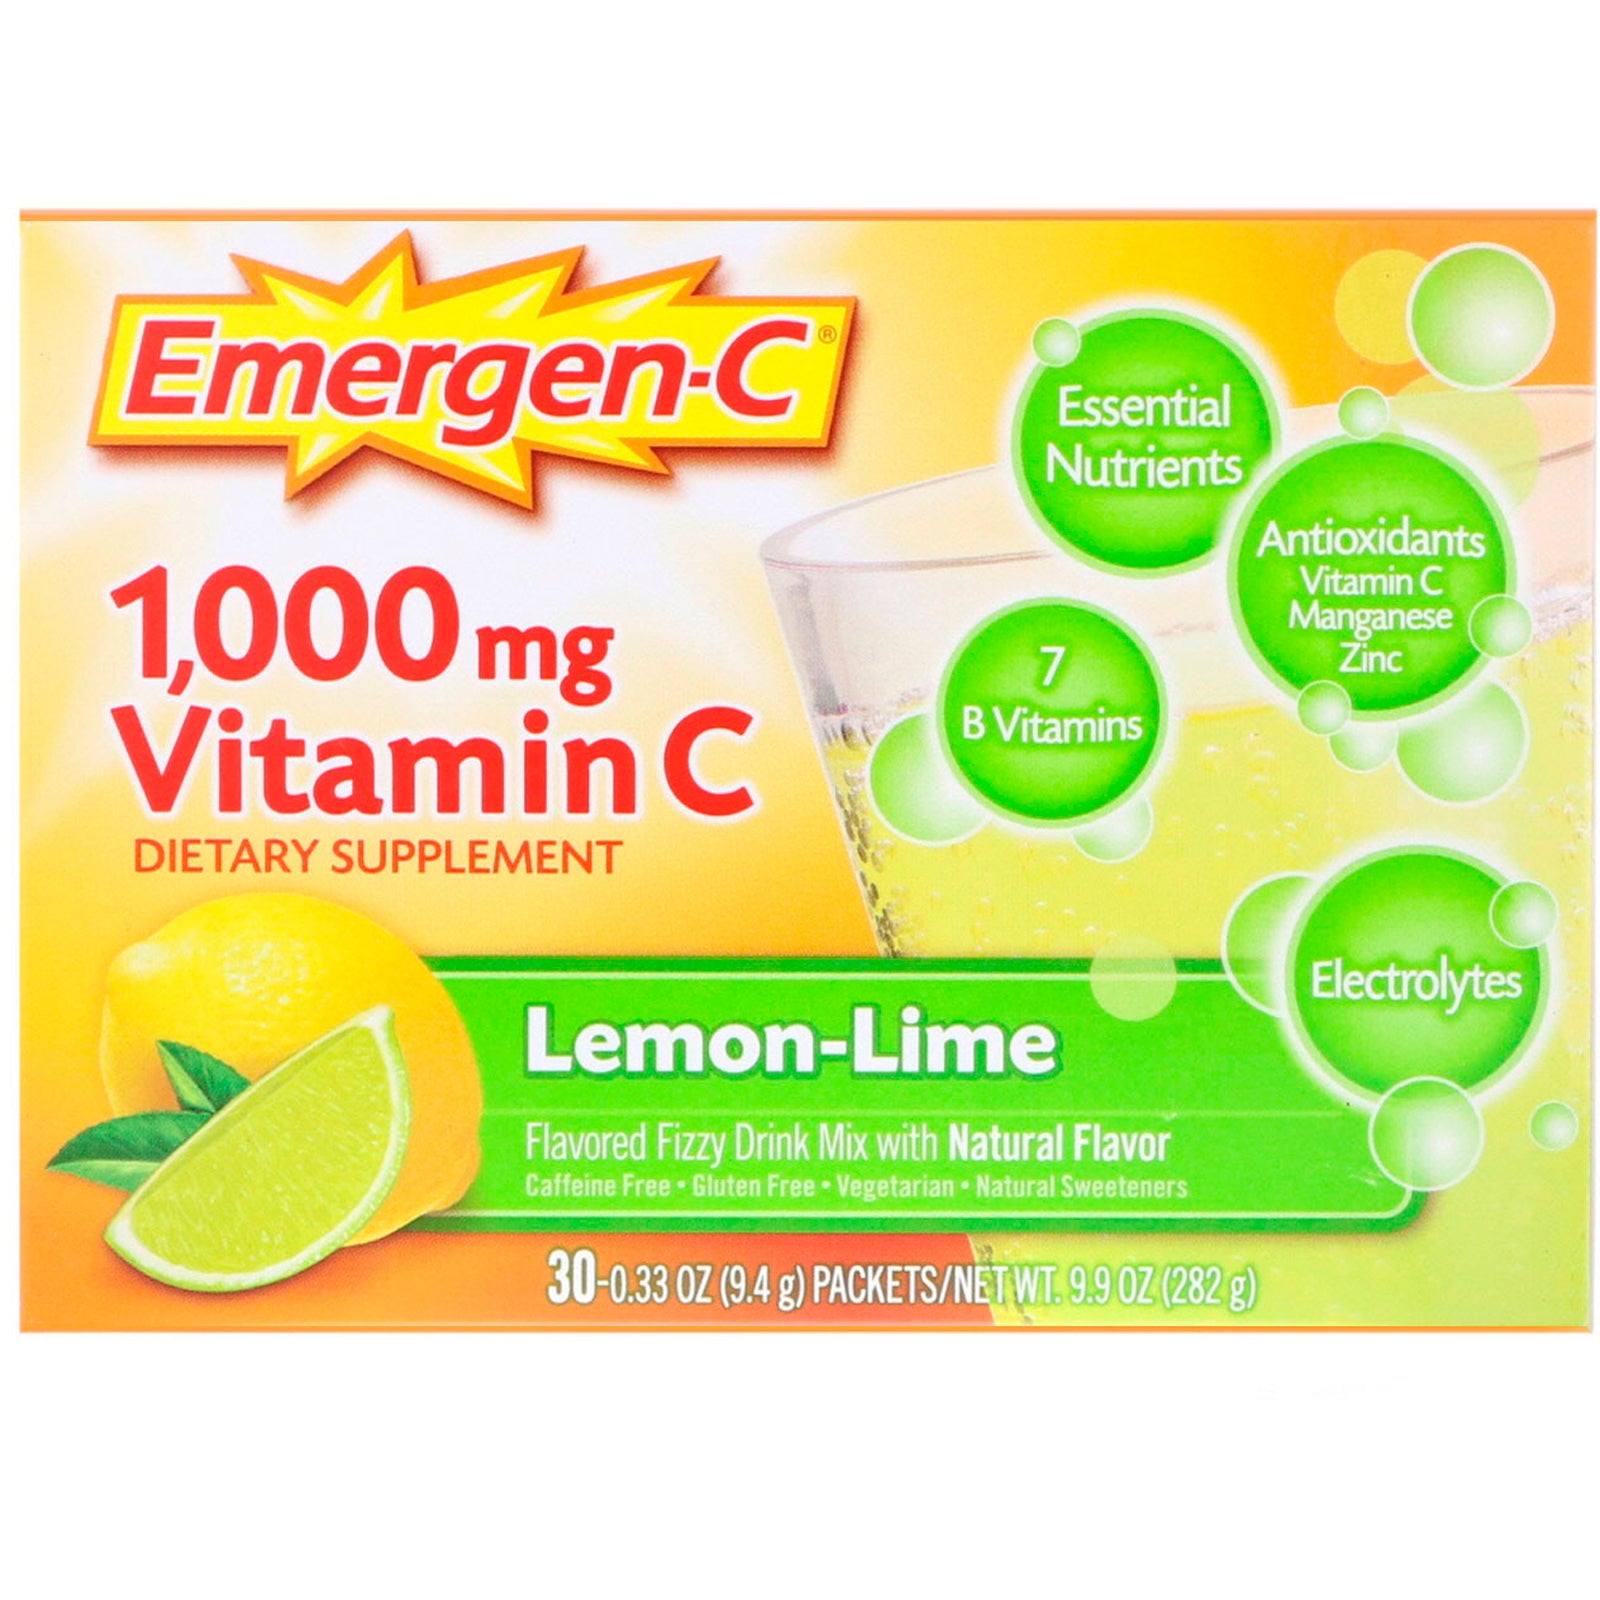 Emergen-C, Vitamin C, Flavored Fizzy Drink Mix, Lemon-Lime, 1,000 mg, 30 Packets, 0.33 oz (9.4 g) Each